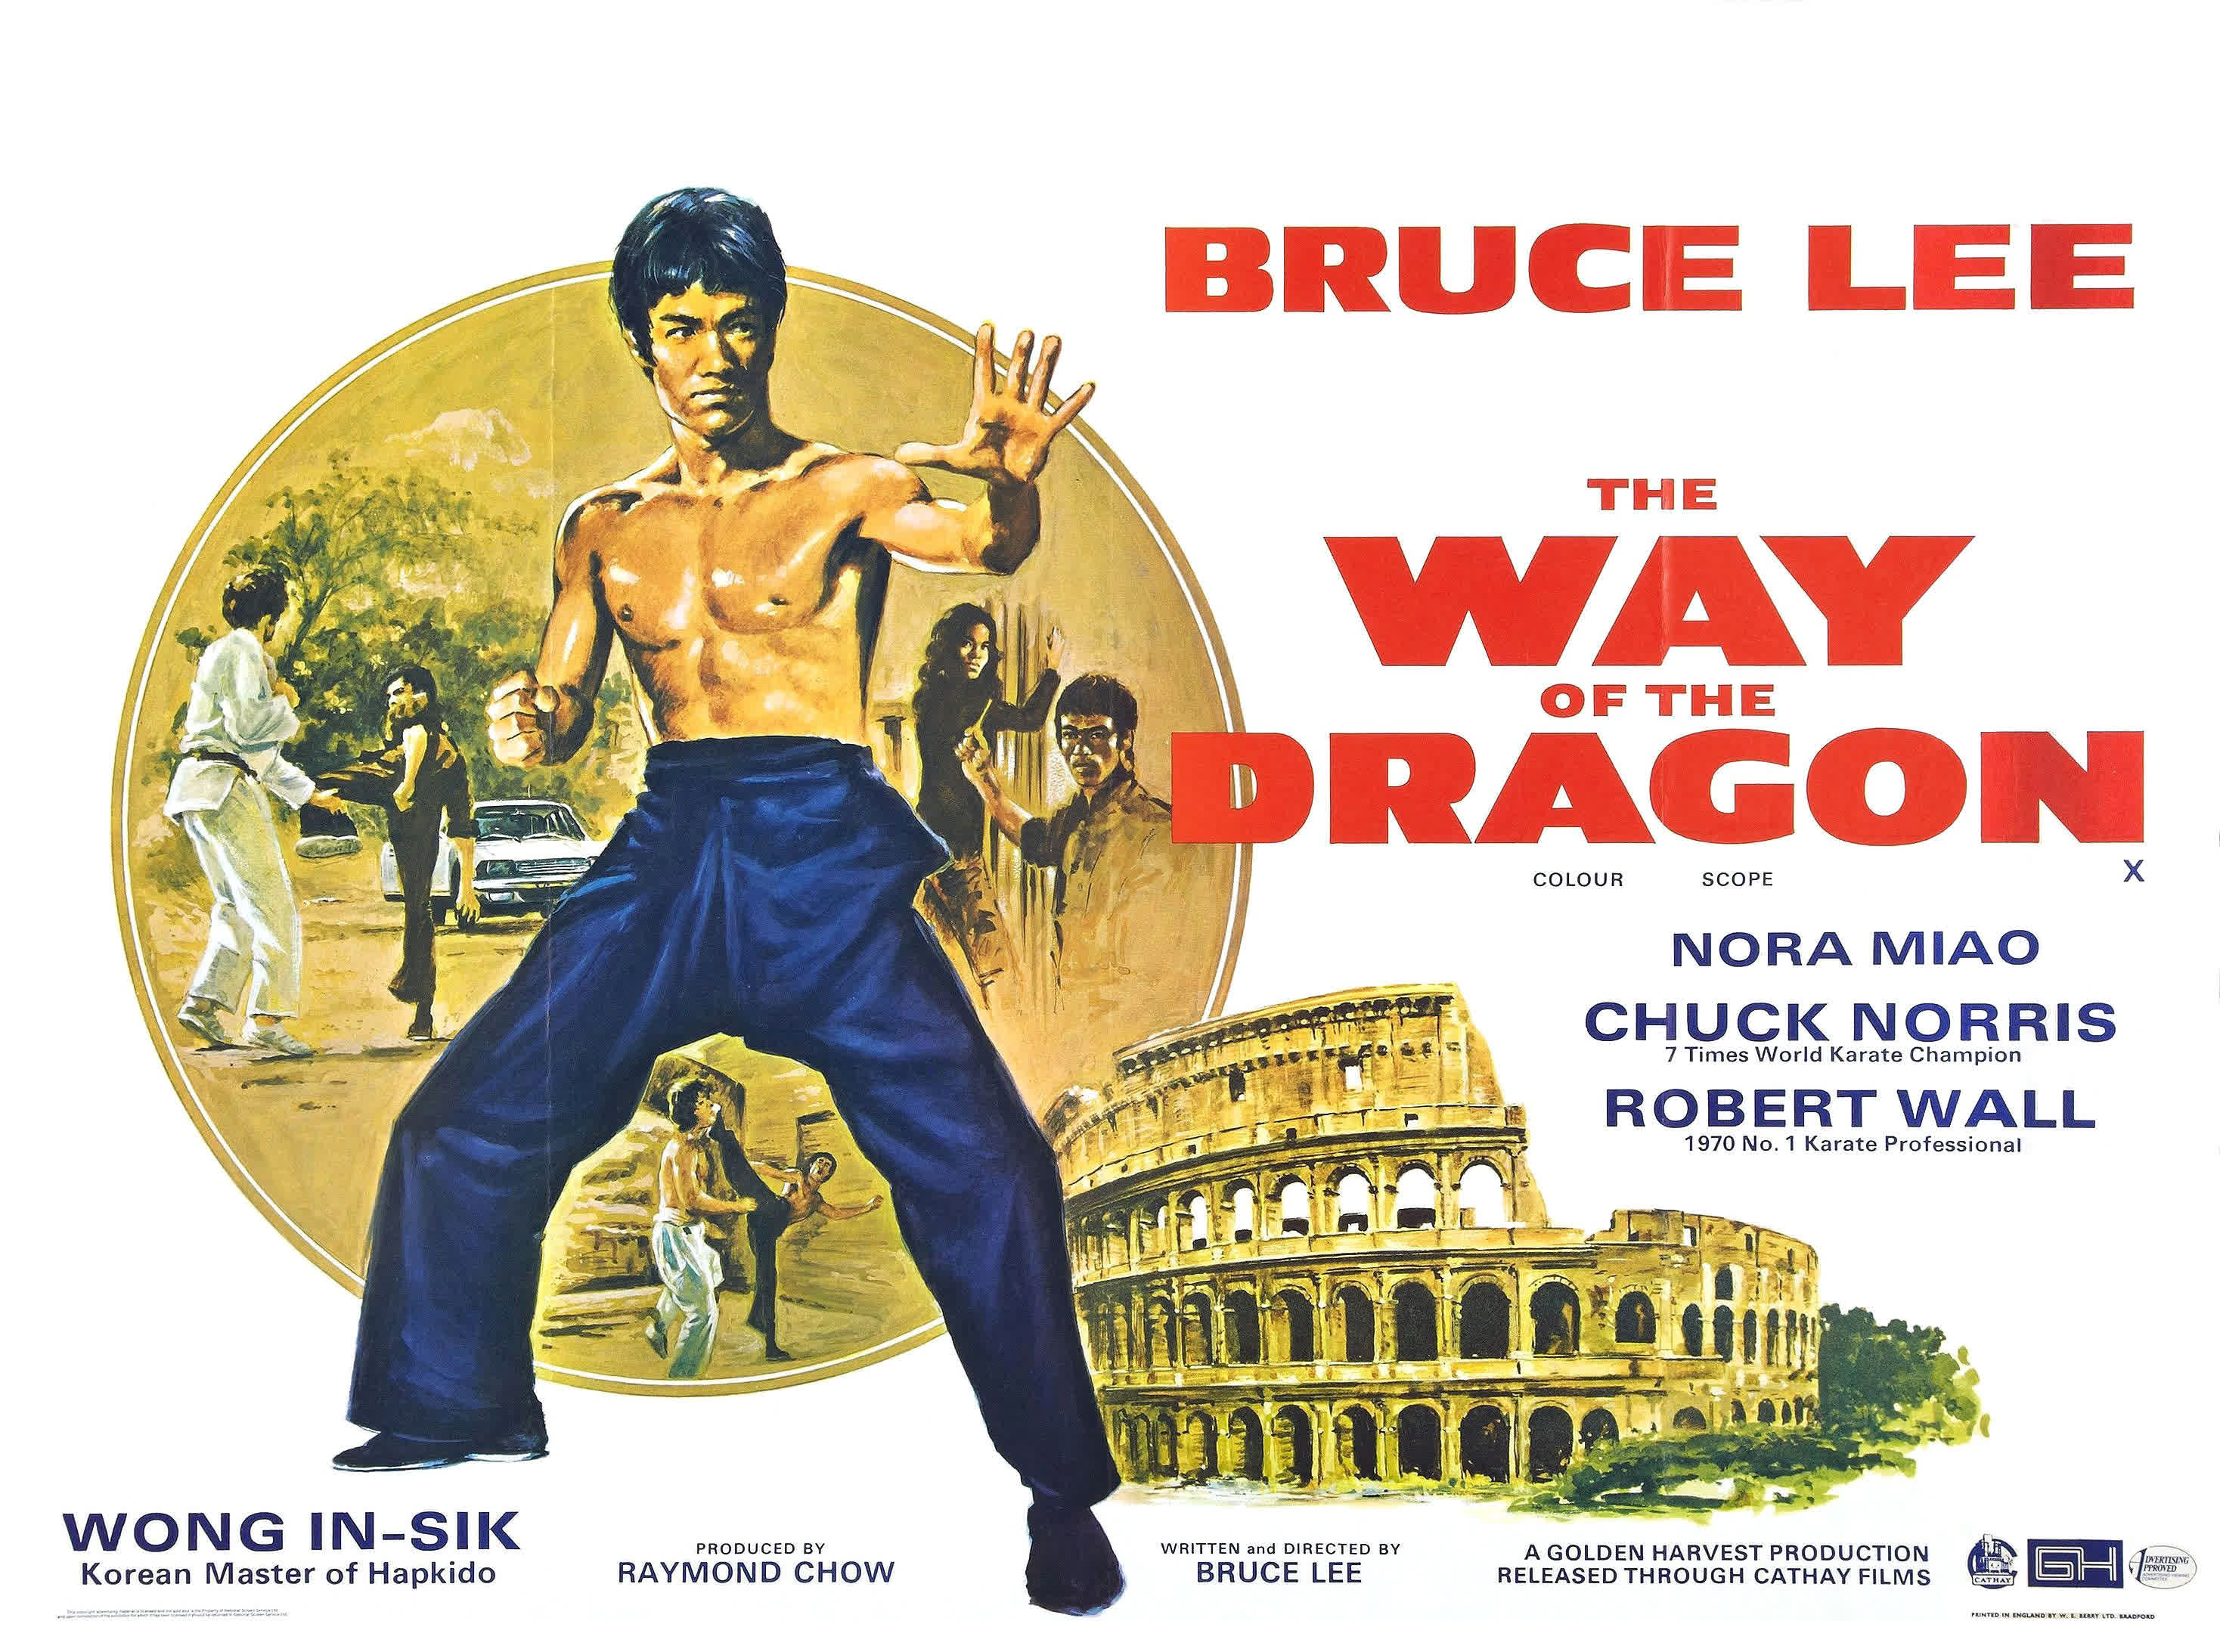 the way of the dragon, movie, bruce lee, poster images